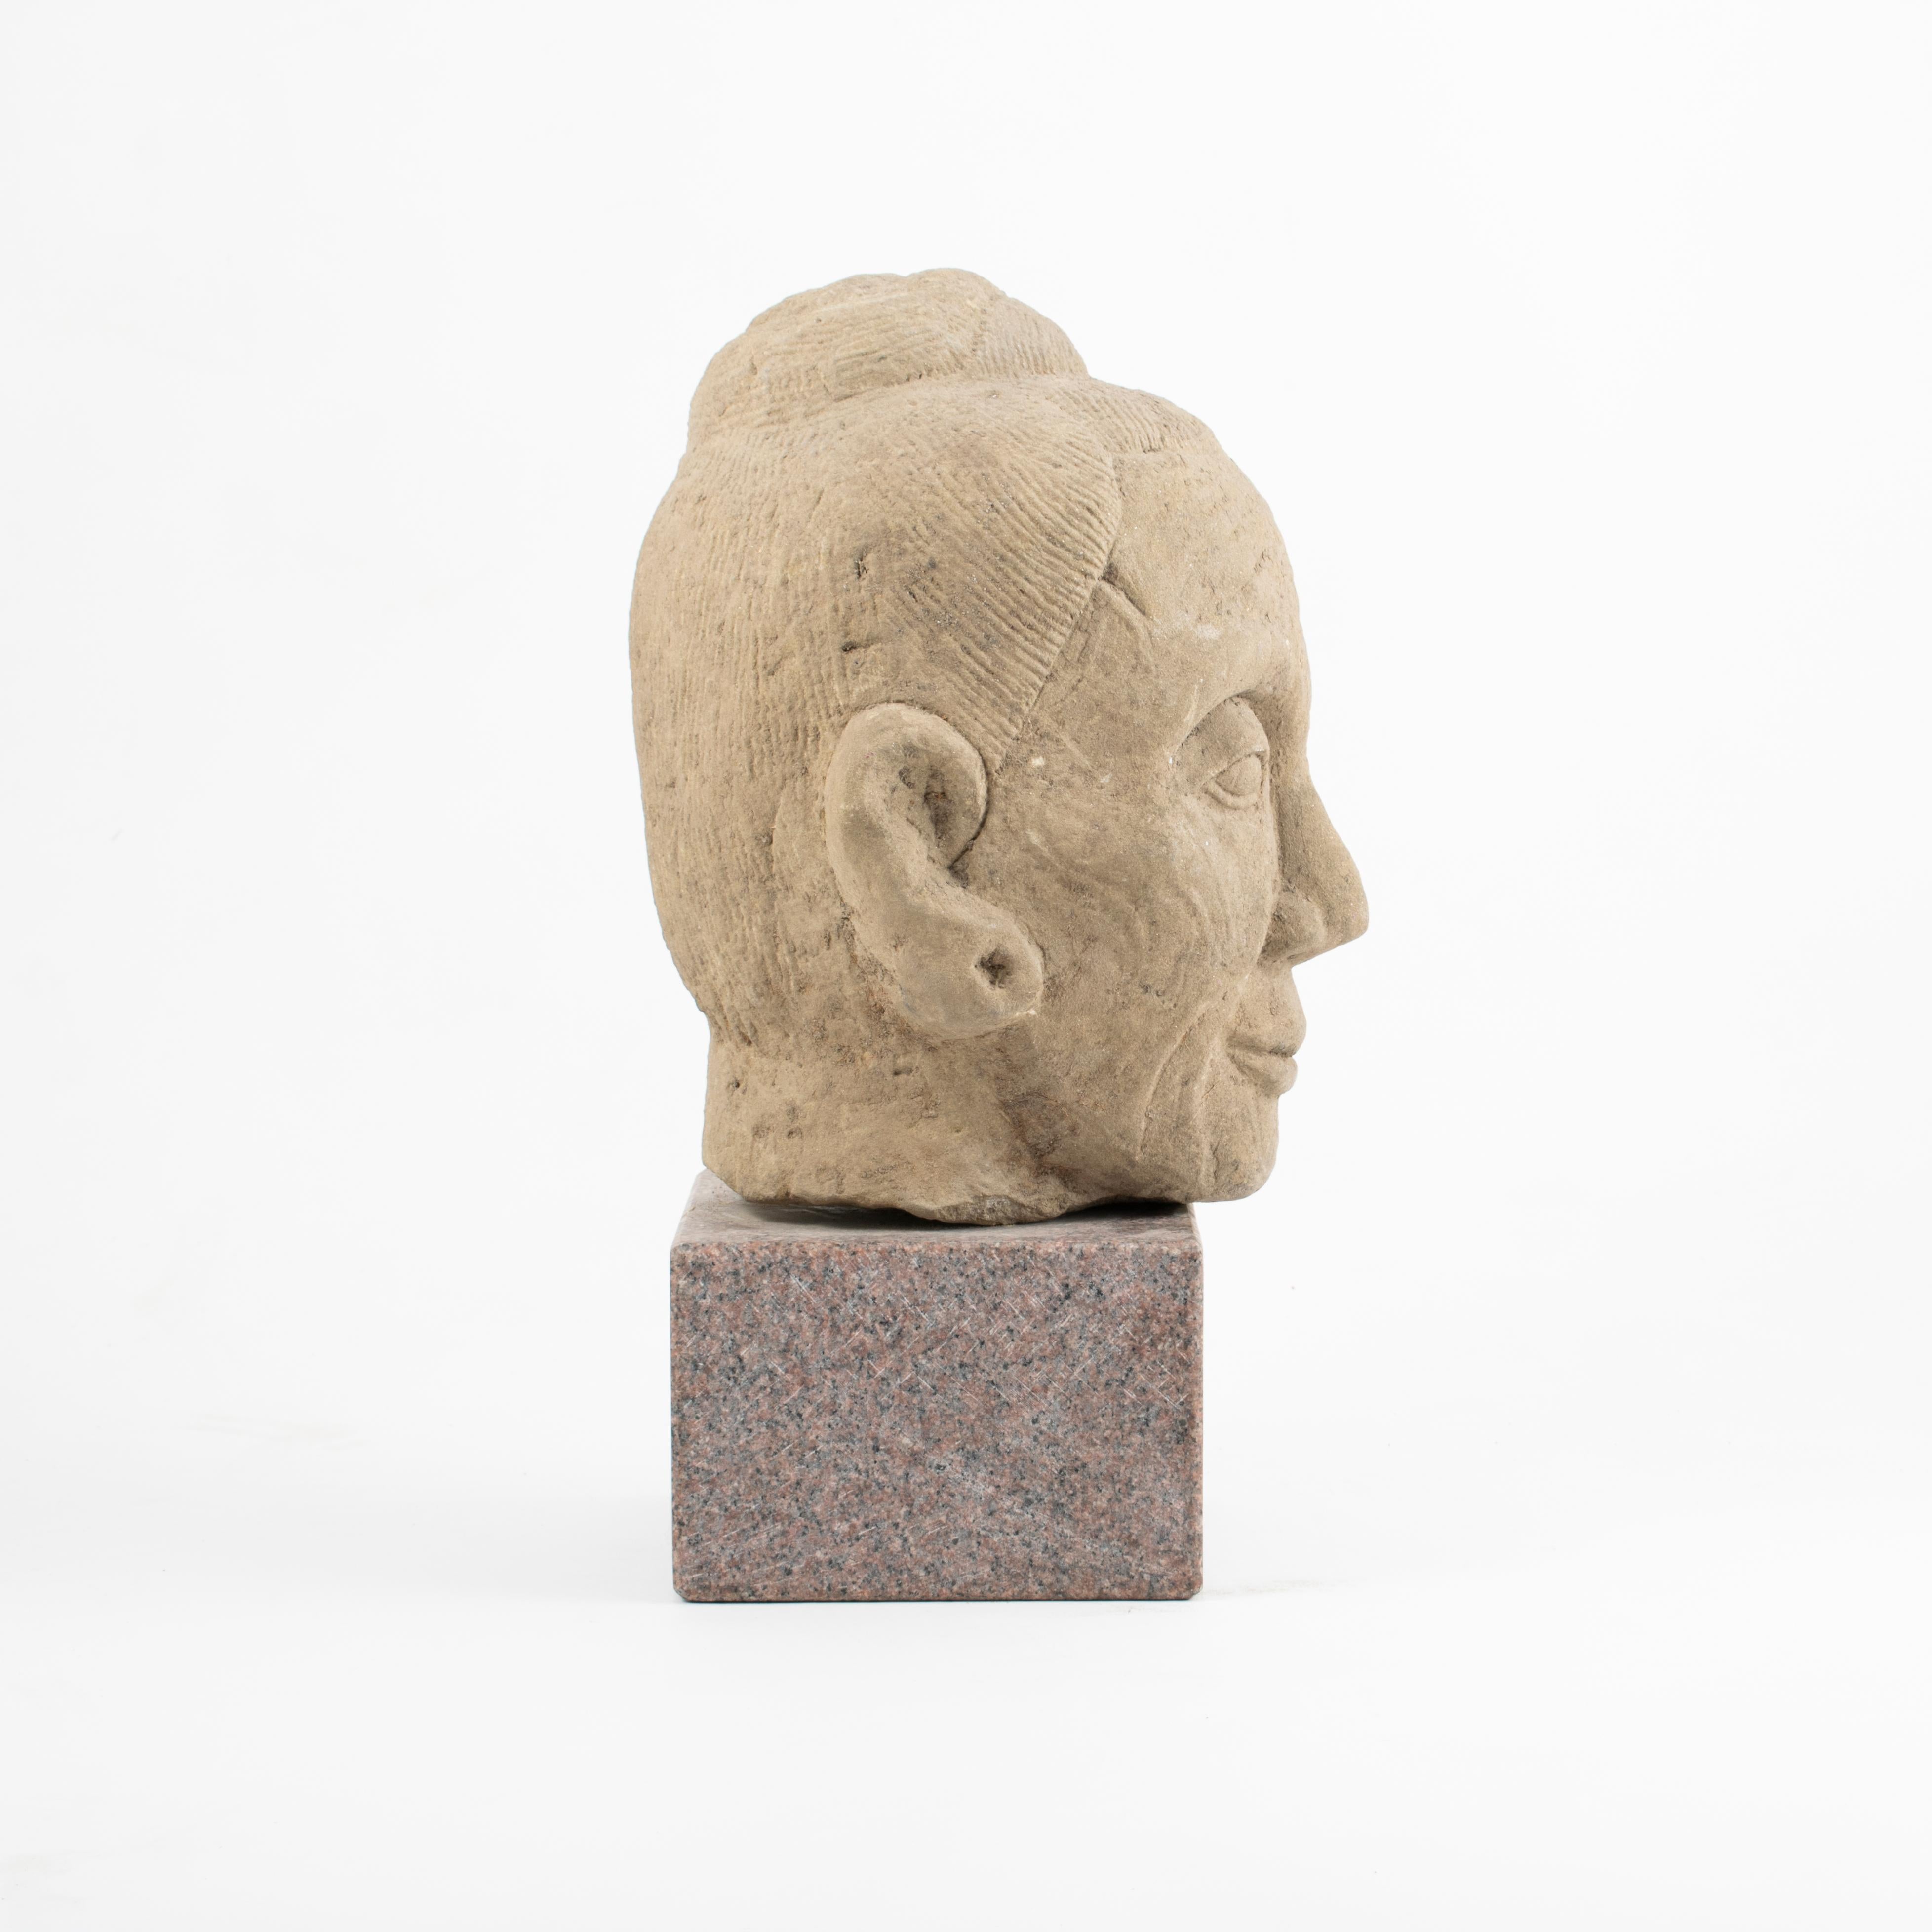 16-17th century hand-carved sandstone head of a Lohan.
Skillful execution, highlighting the face with vigorous modeling and harmoniously expression.
In original and untouched condition. Mounted on later granite plinth.
China or Burma, 1600-1700th